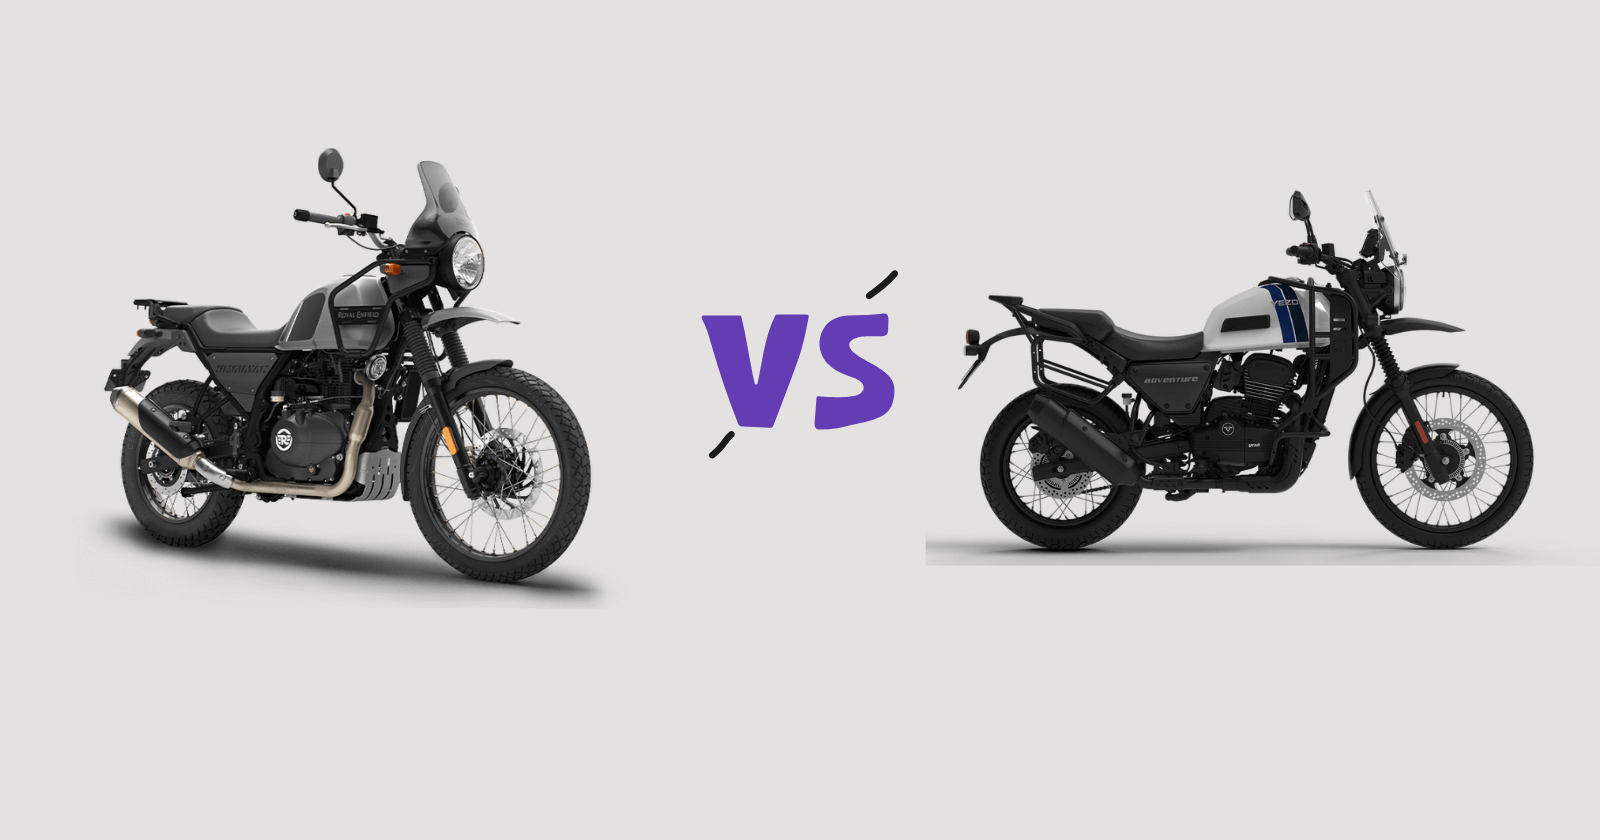 Yezdi Adventure vs Royal Enfield Himalayan: Compare prices, specs, and features